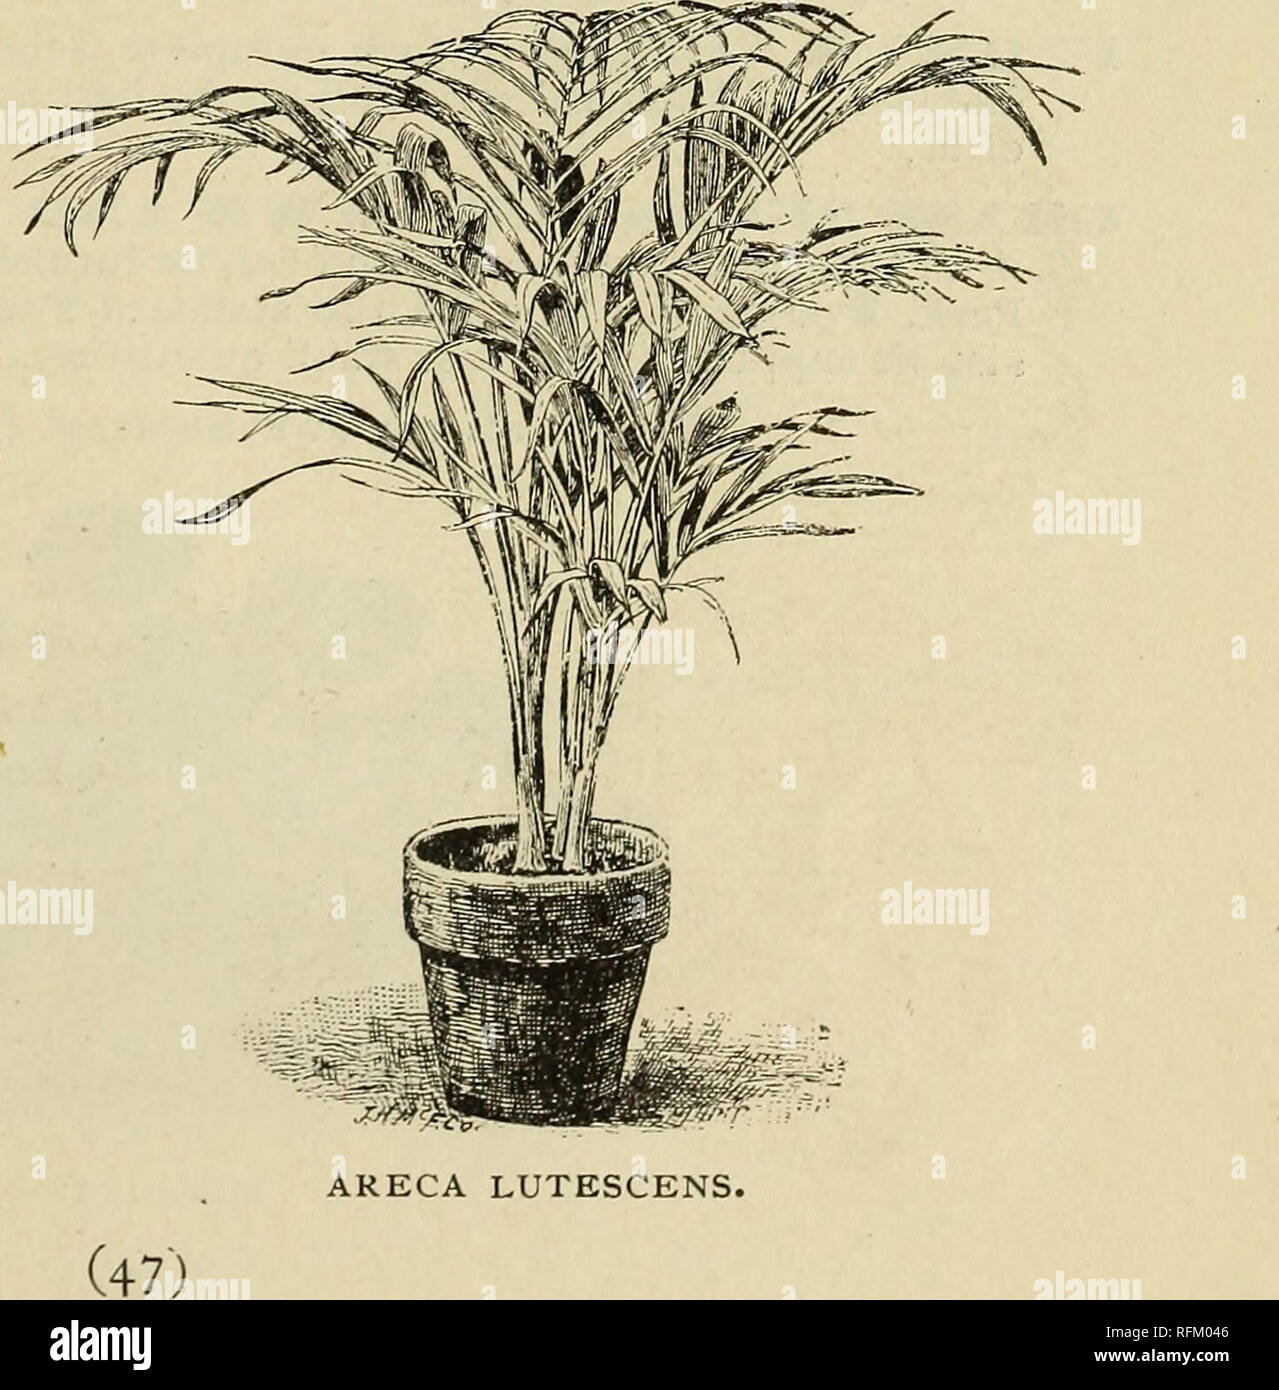 . Trees and plants, hardy ornamentals. Nursery stock New York (State) Catalogs; Plants, Ornamental Catalogs; Ornamental trees Catalogs; Flowers Catalogs; Fruit Catalogs. CHARLES FMMP, RYE, N. Y. Qre^ou^ Departm^r&gt;t. GLADIOLUS, Choice Mixed. Will give brilliant spikes of bloom in a great variety of colors. $2 per 100. Extra Choice Mixed. A special and select assortment of varieties and colors. $4 per 100. HELIOTROPE, Chieftain. The finest and sweetest variety in this fragrant genus. Flowers lilac, in large trusses. HYDRANGEA. See under Deciduous Shrubs. IVY, English. See Hedera, under Climbe Stock Photo